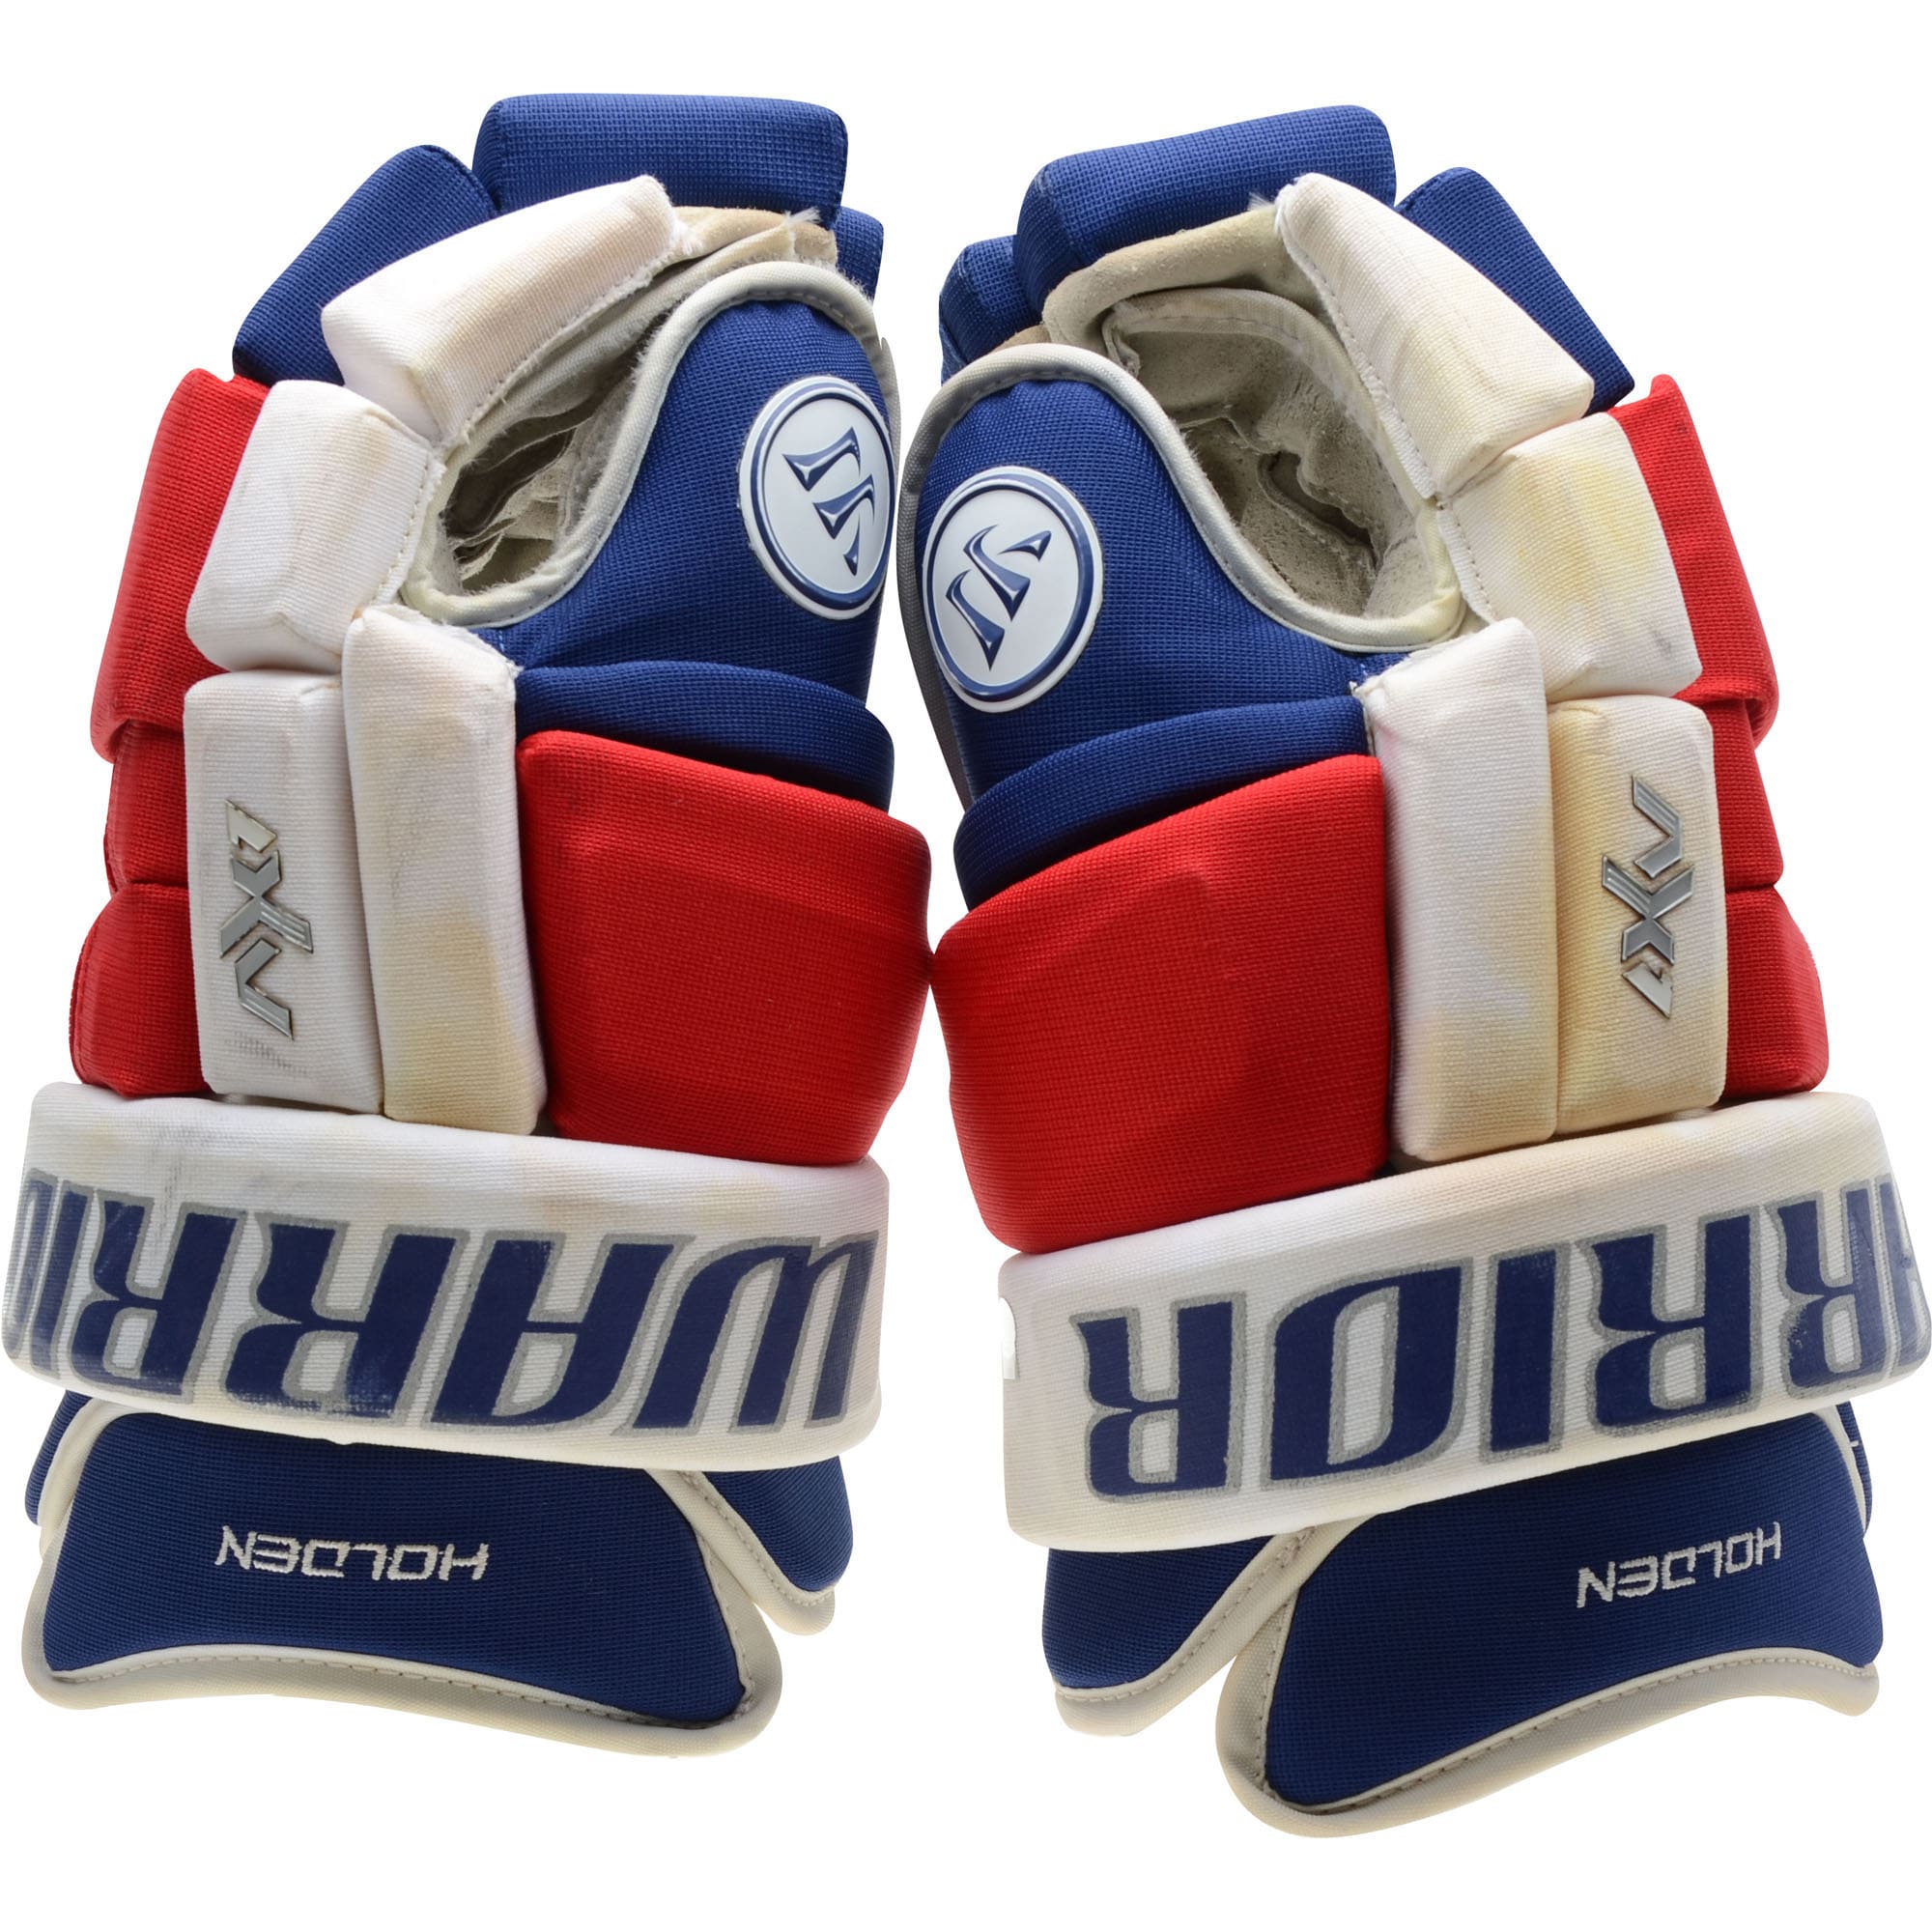 Nick Holden New York Rangers Game-Used Blue and Red Warrior Gloves from the 2016-17 NHL Season